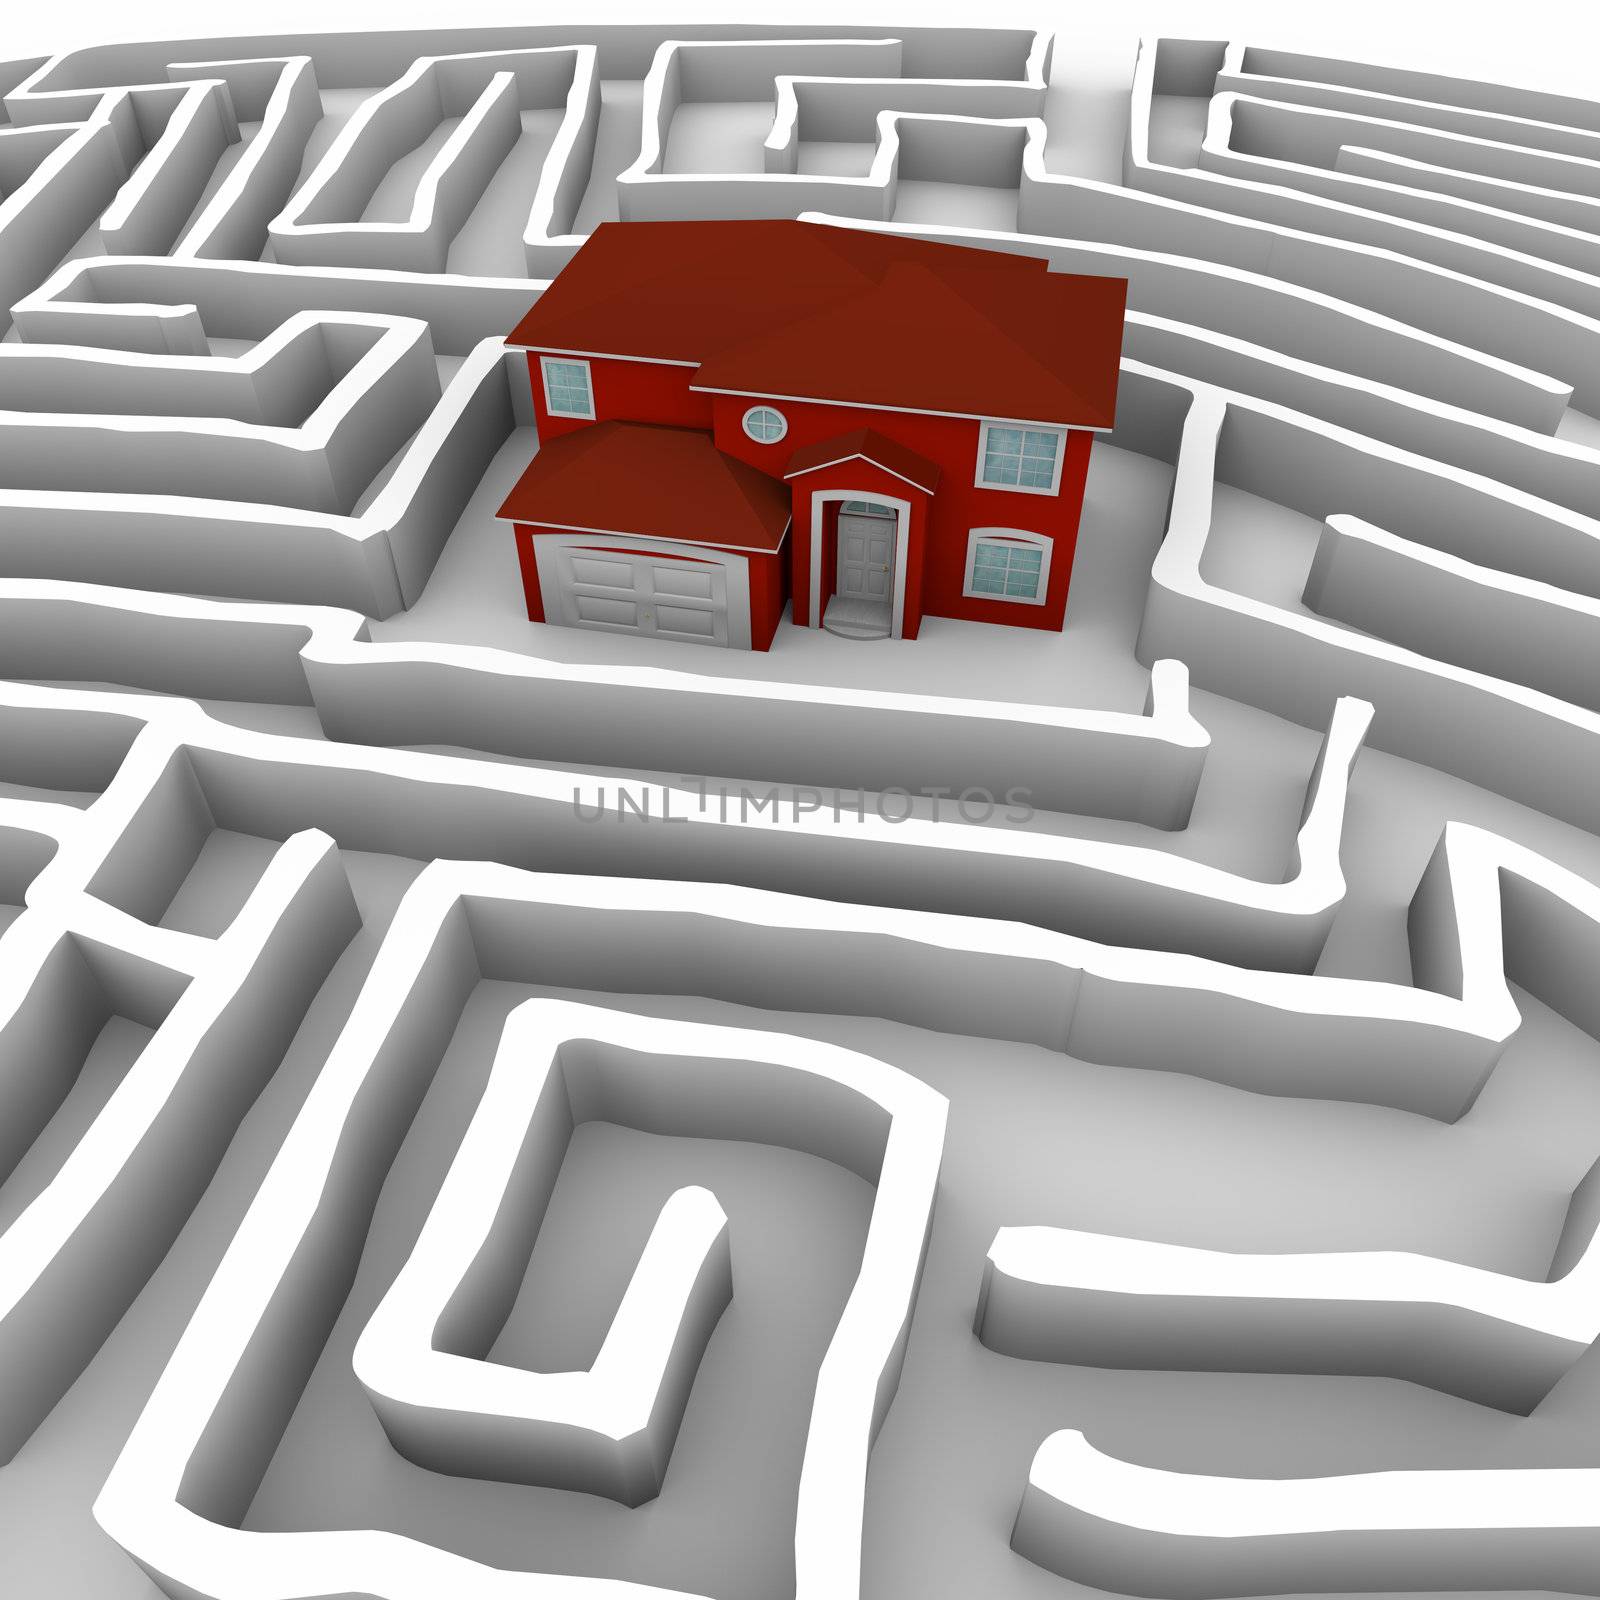 A red maze sits at the center of a complex labyrinth, symbolizing the challenges of home ownership